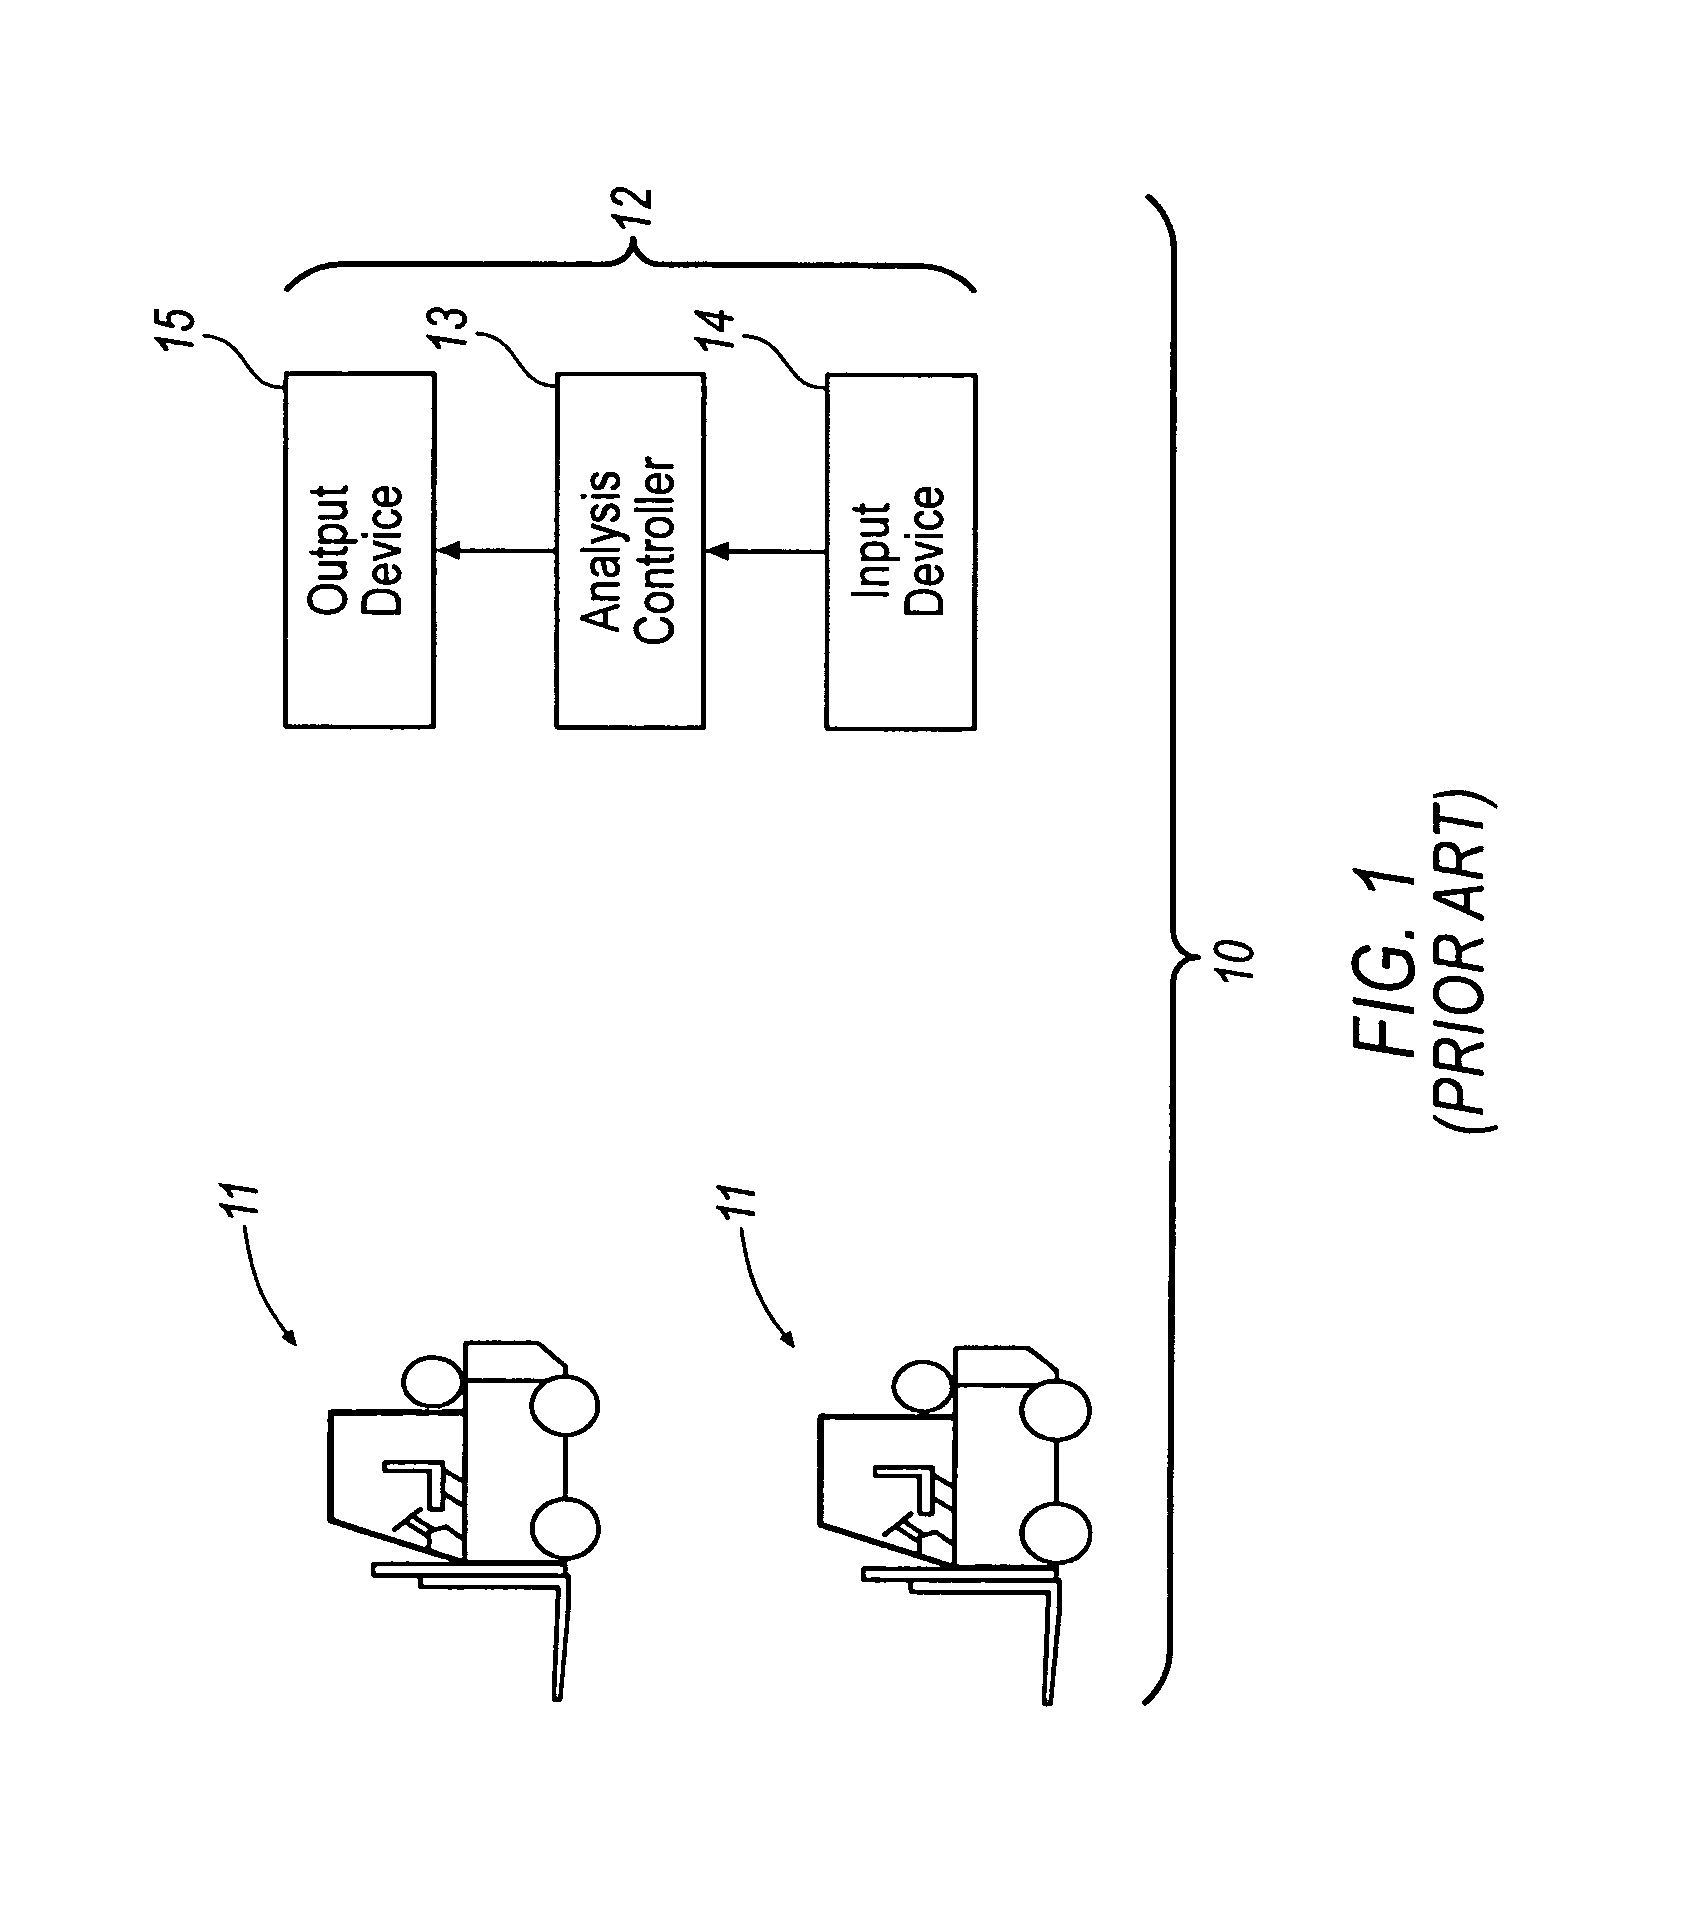 Apparatus and method for tracking and managing physical assets